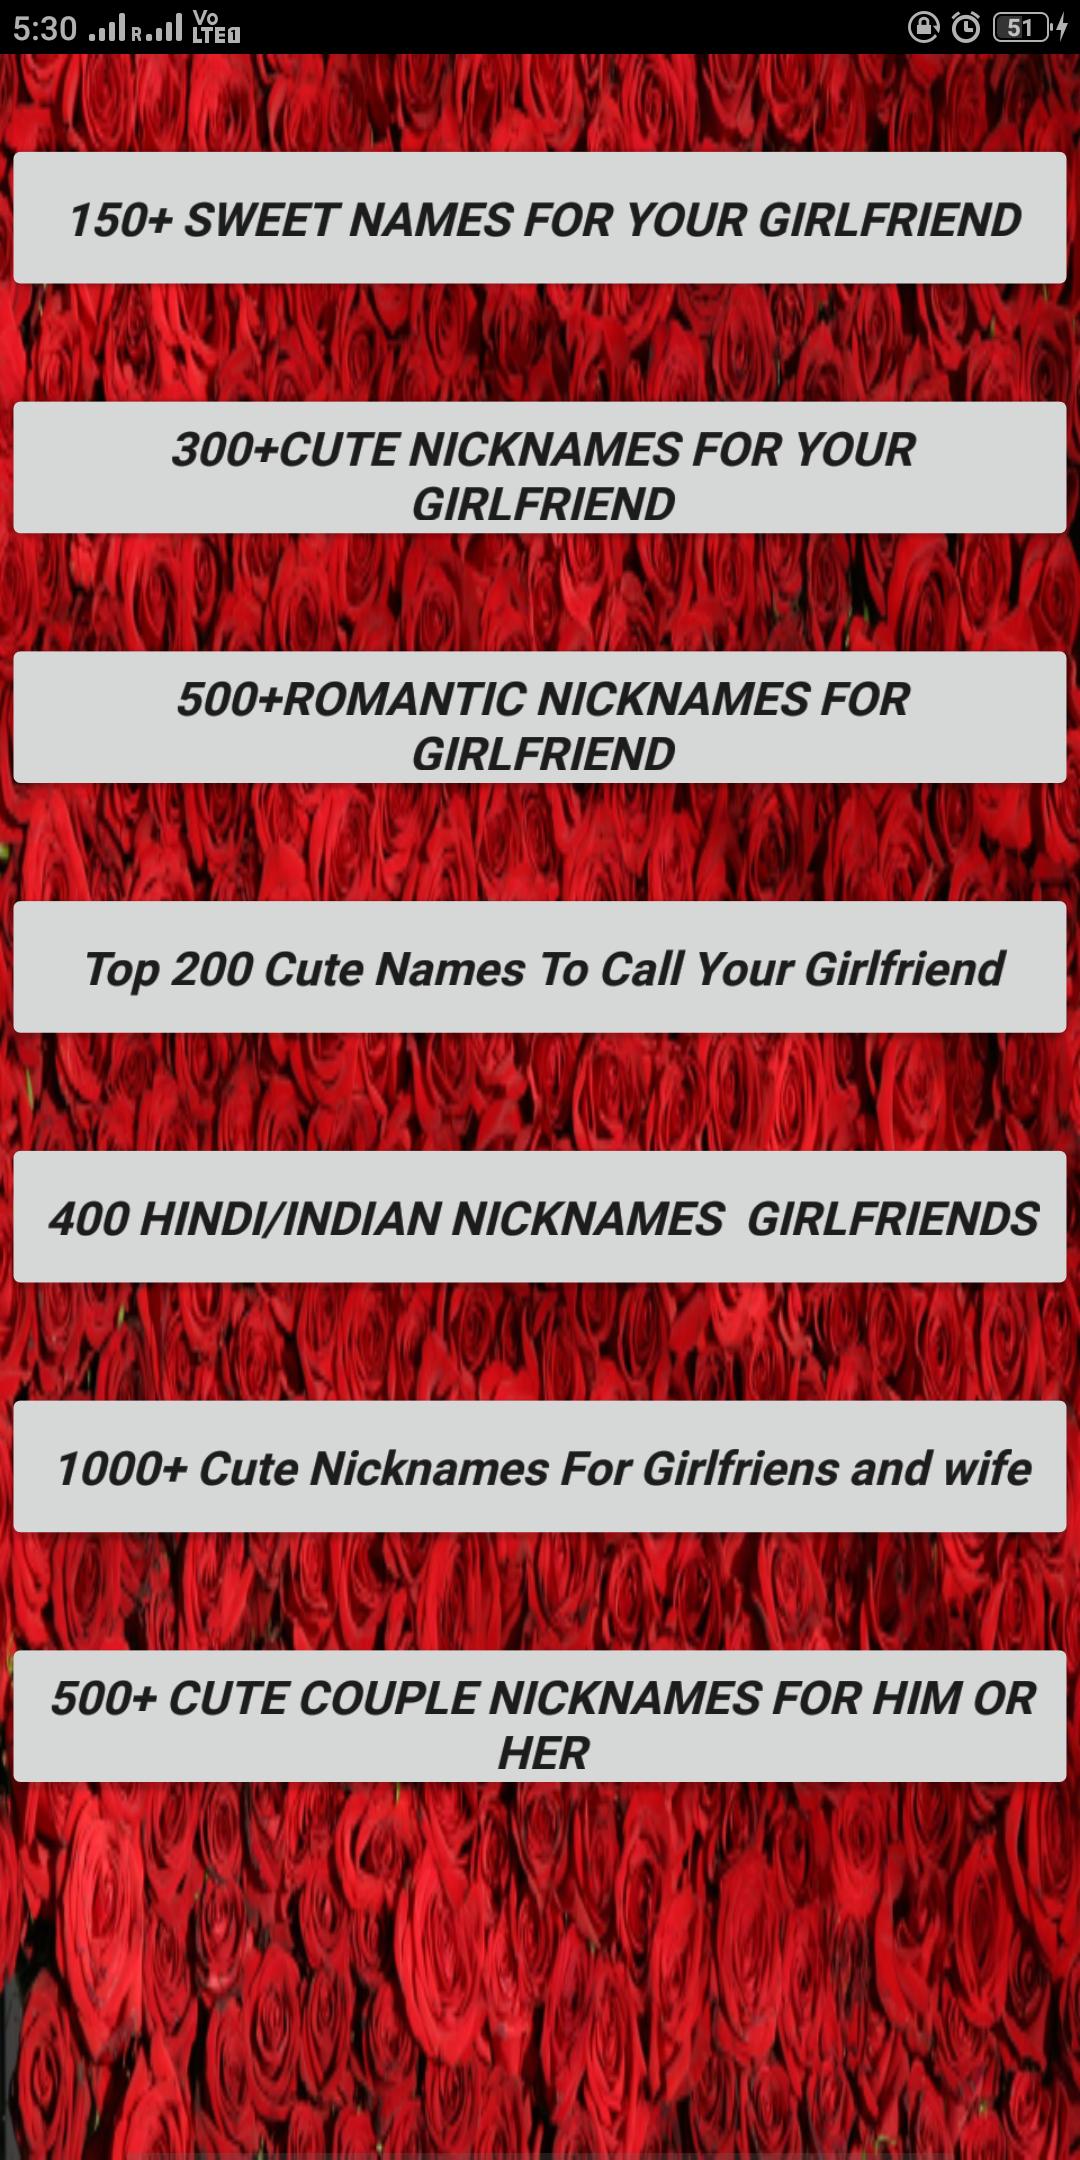 Your you what can names girlfriend call 100 Romantic